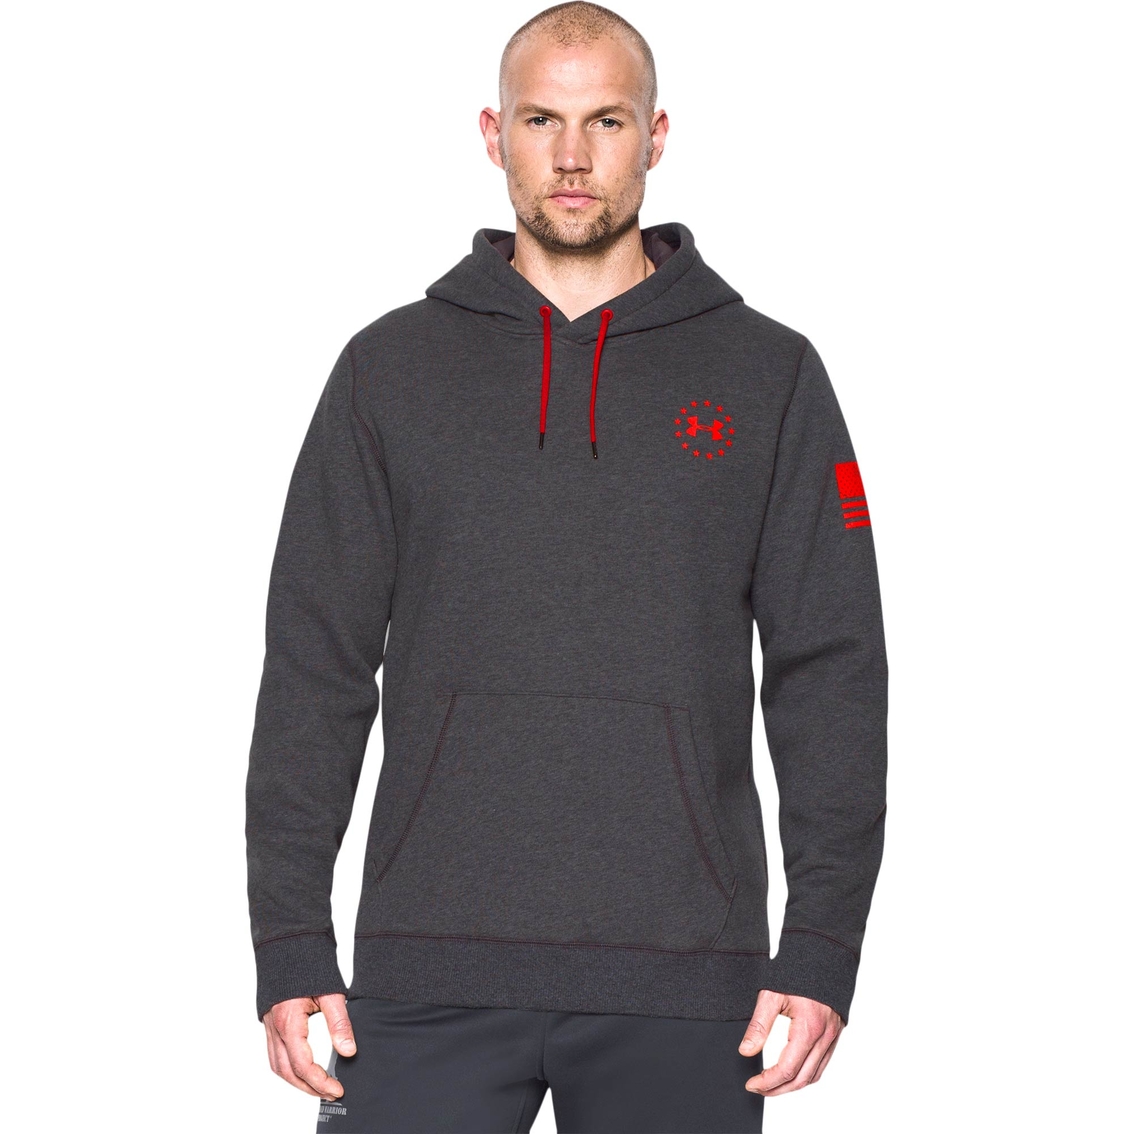 under armour wounded warrior project jacket